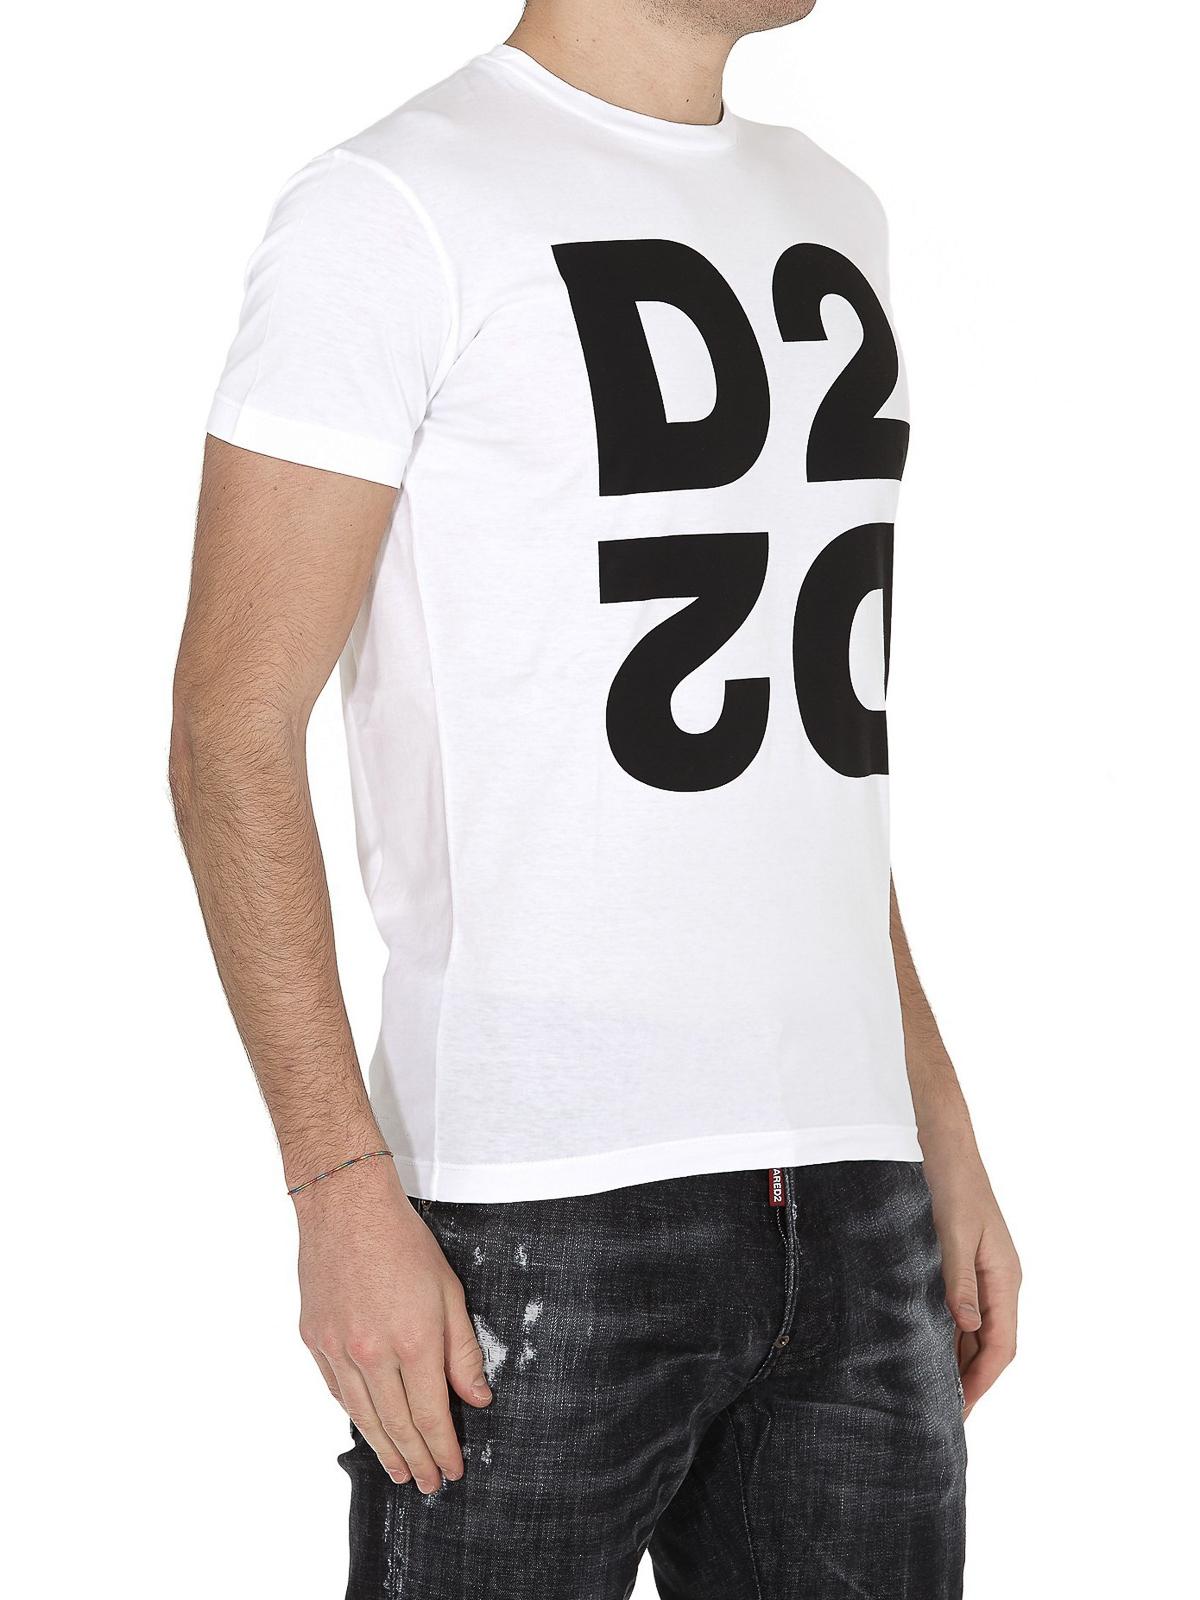 DSquared² D2 Logo Printed Jersey T-shirt in White for Men - Lyst